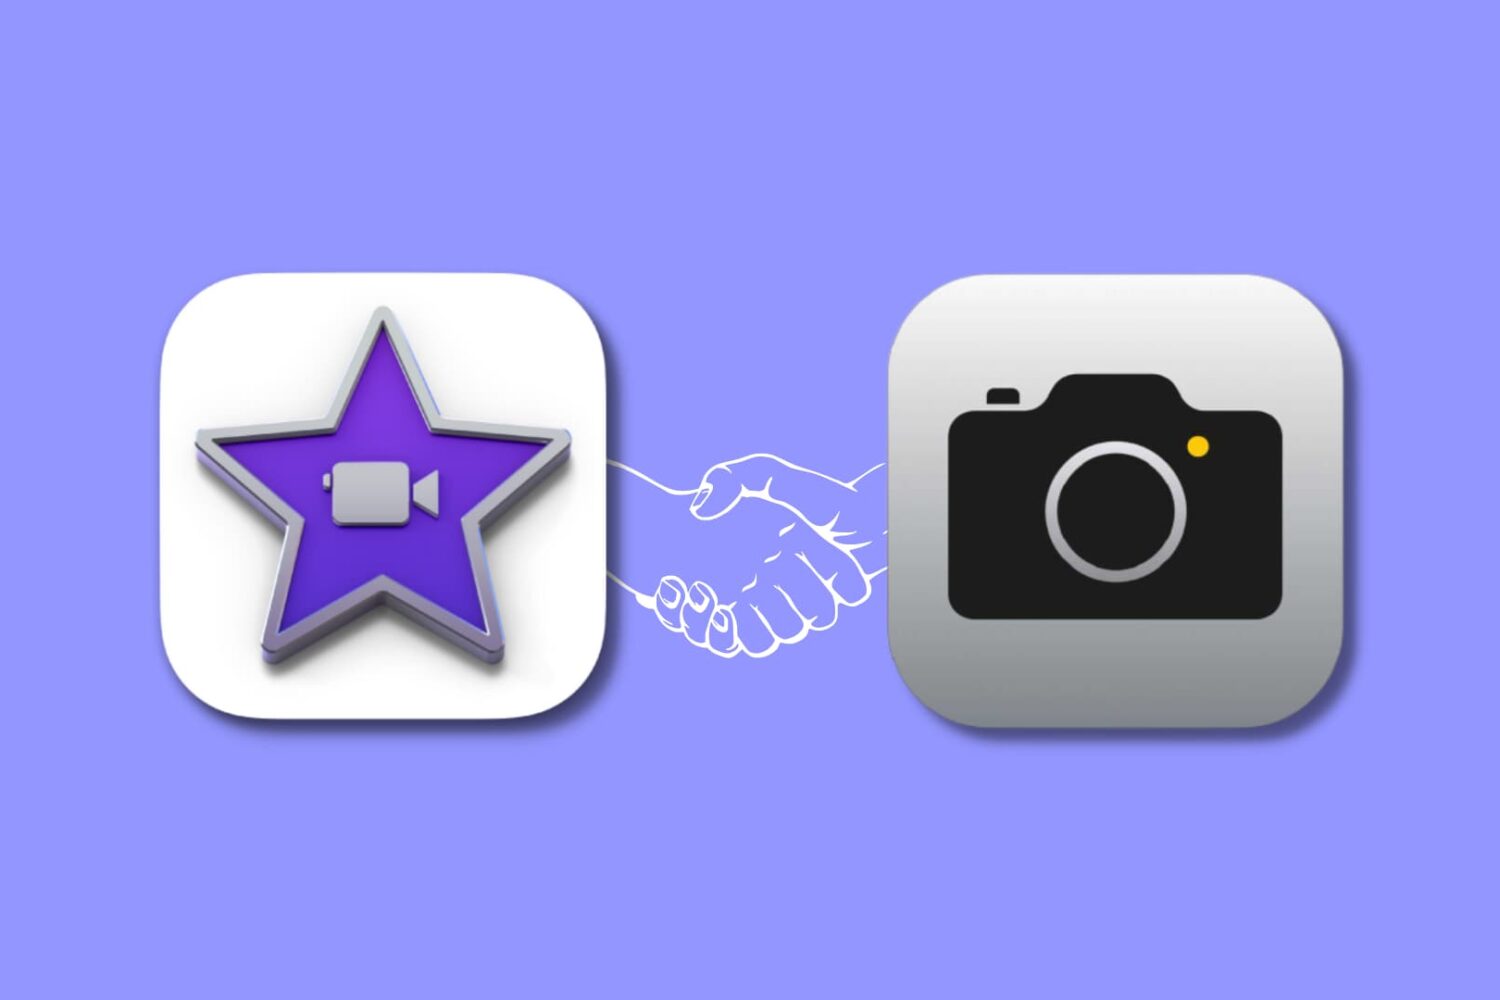 iMovie and Apple Camera logos with a handshake icon connecting them